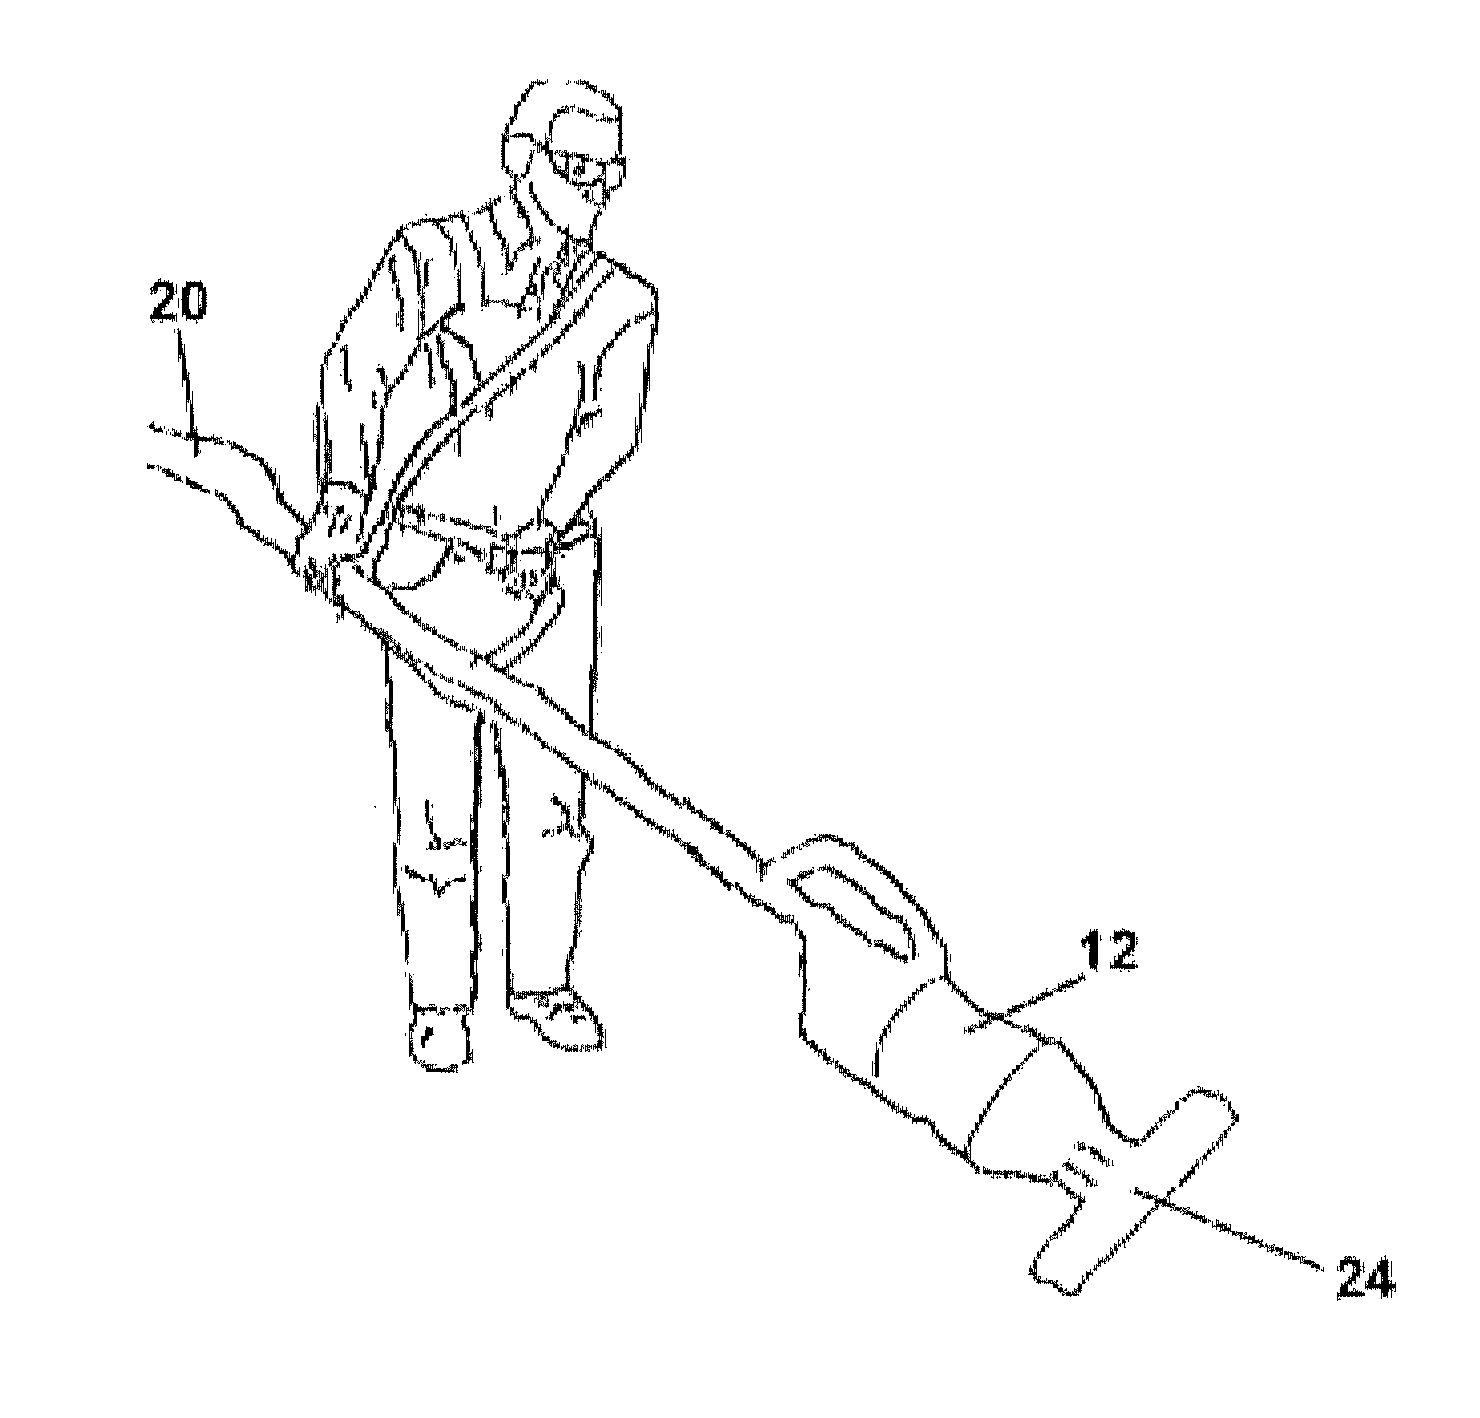 Apparatus for removing a layer of sediment which has settled on the bottom of a pond